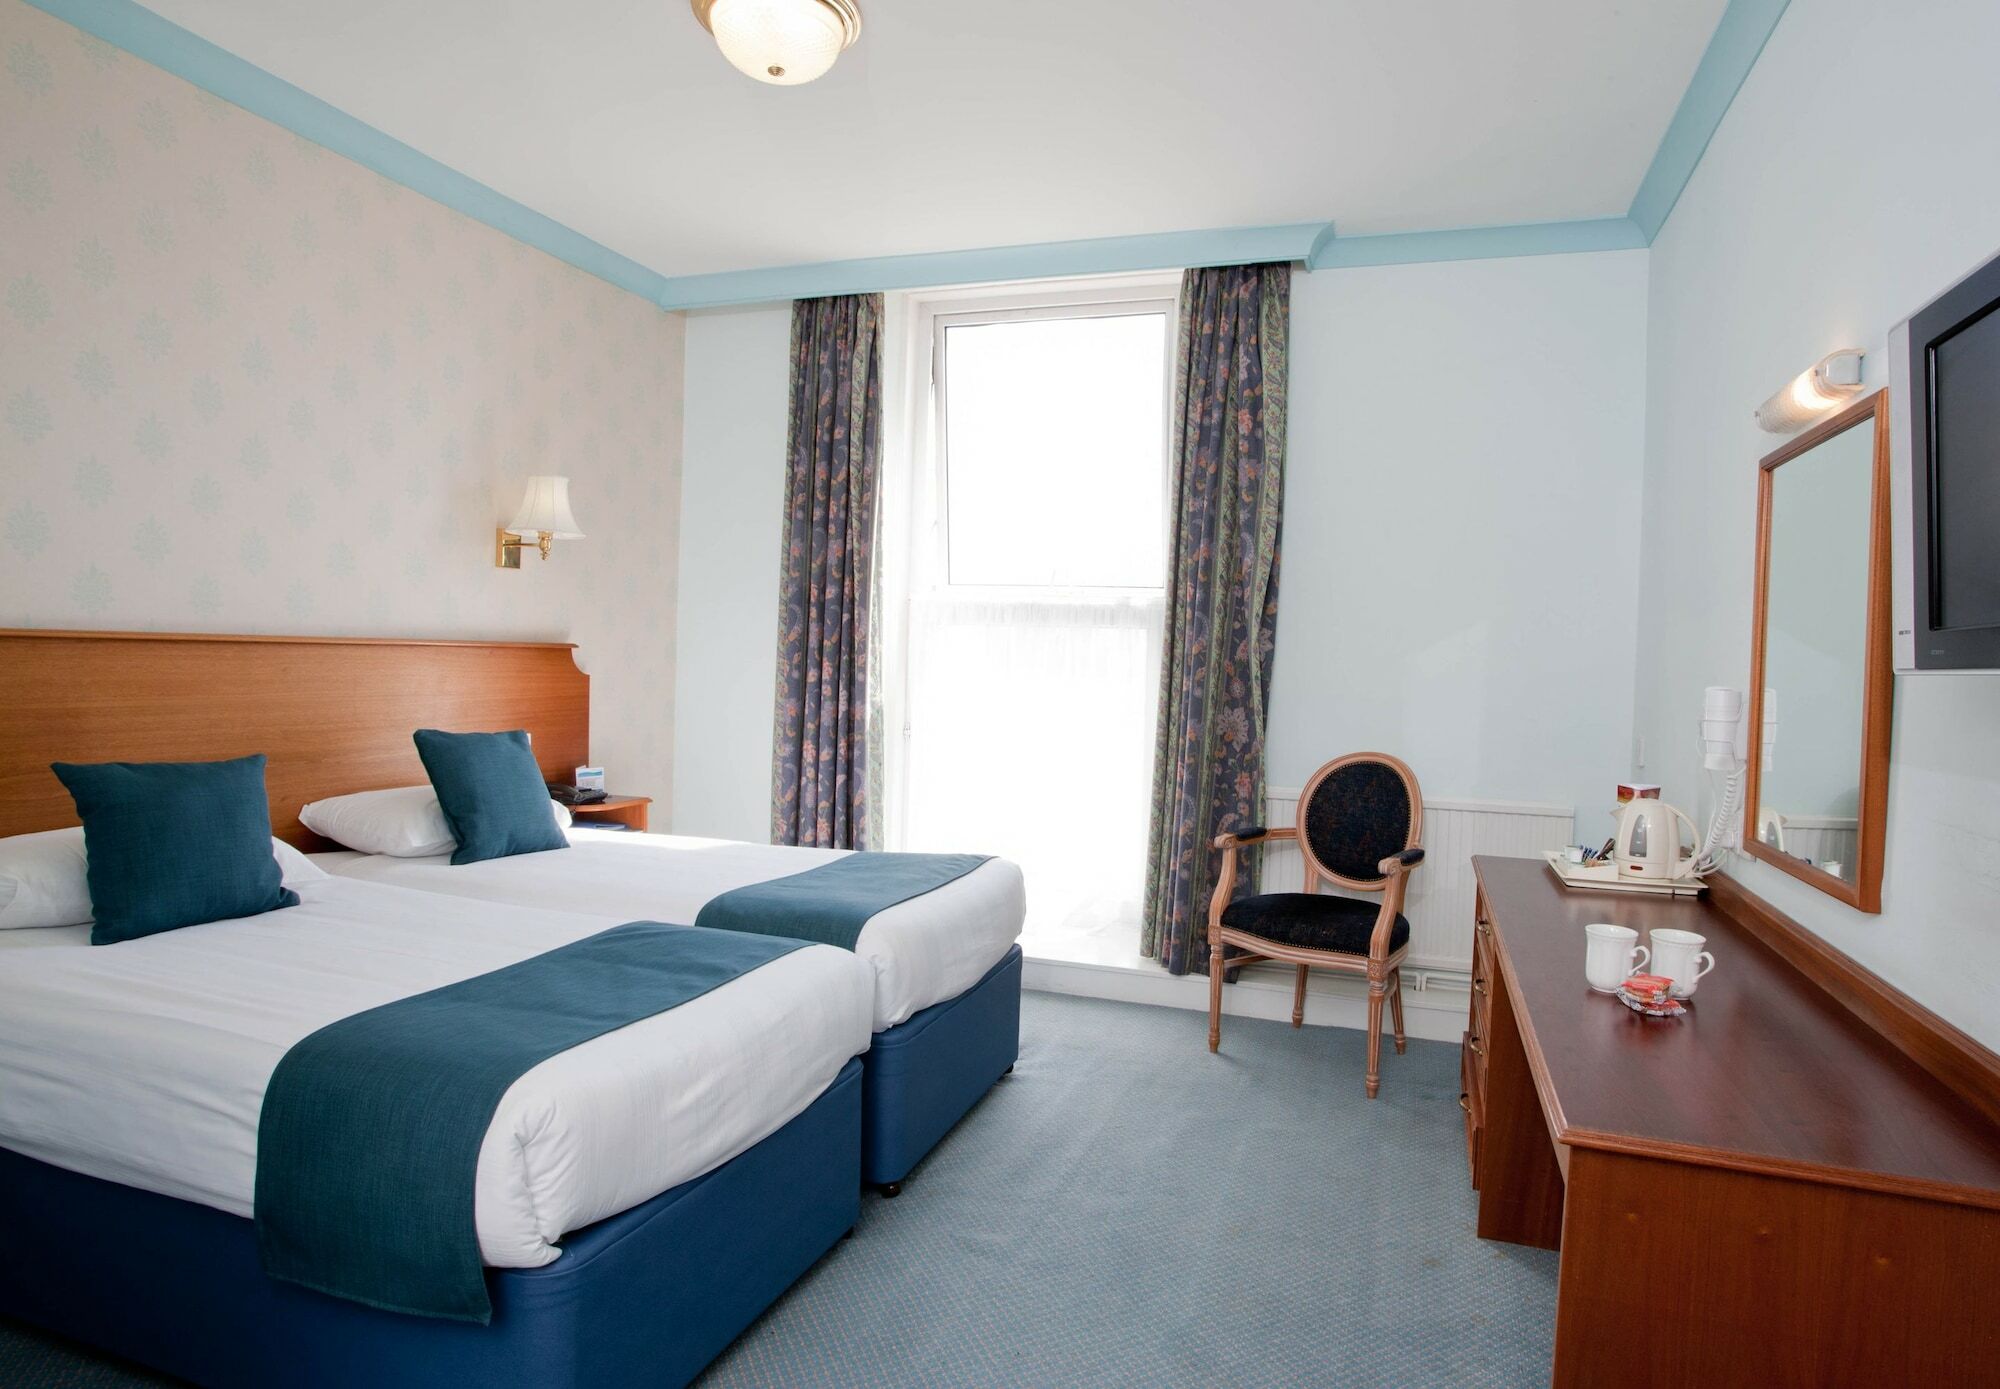 Tlh Victoria Hotel - Tlh Leisure, Entertainment And Spa Resort Torquay Bagian luar foto